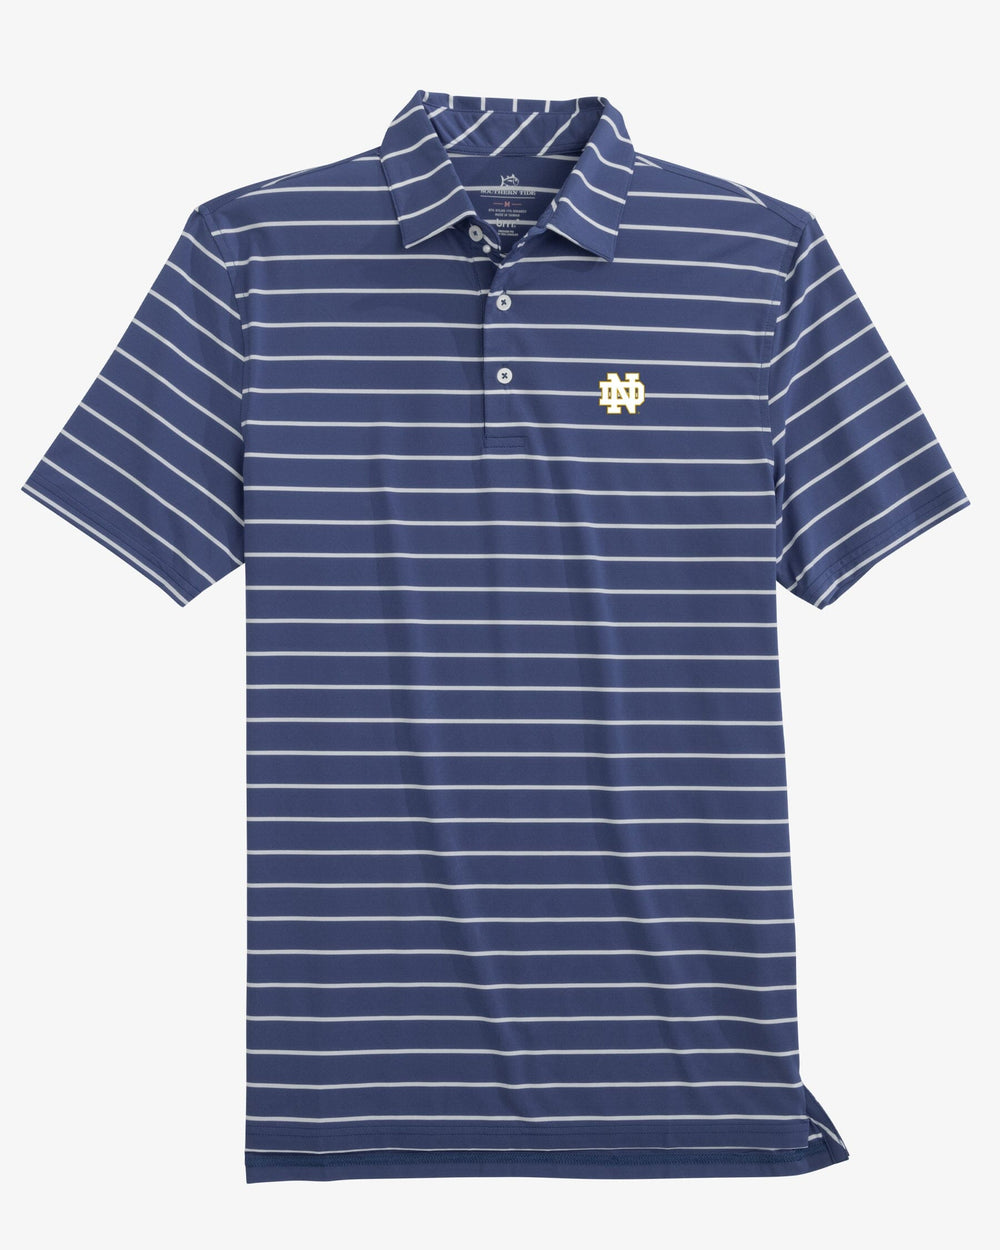 The front view of the Notre Dame Fighting Irish Brreeze Desmond Stripe Performance Polo by Southern Tide - Navy